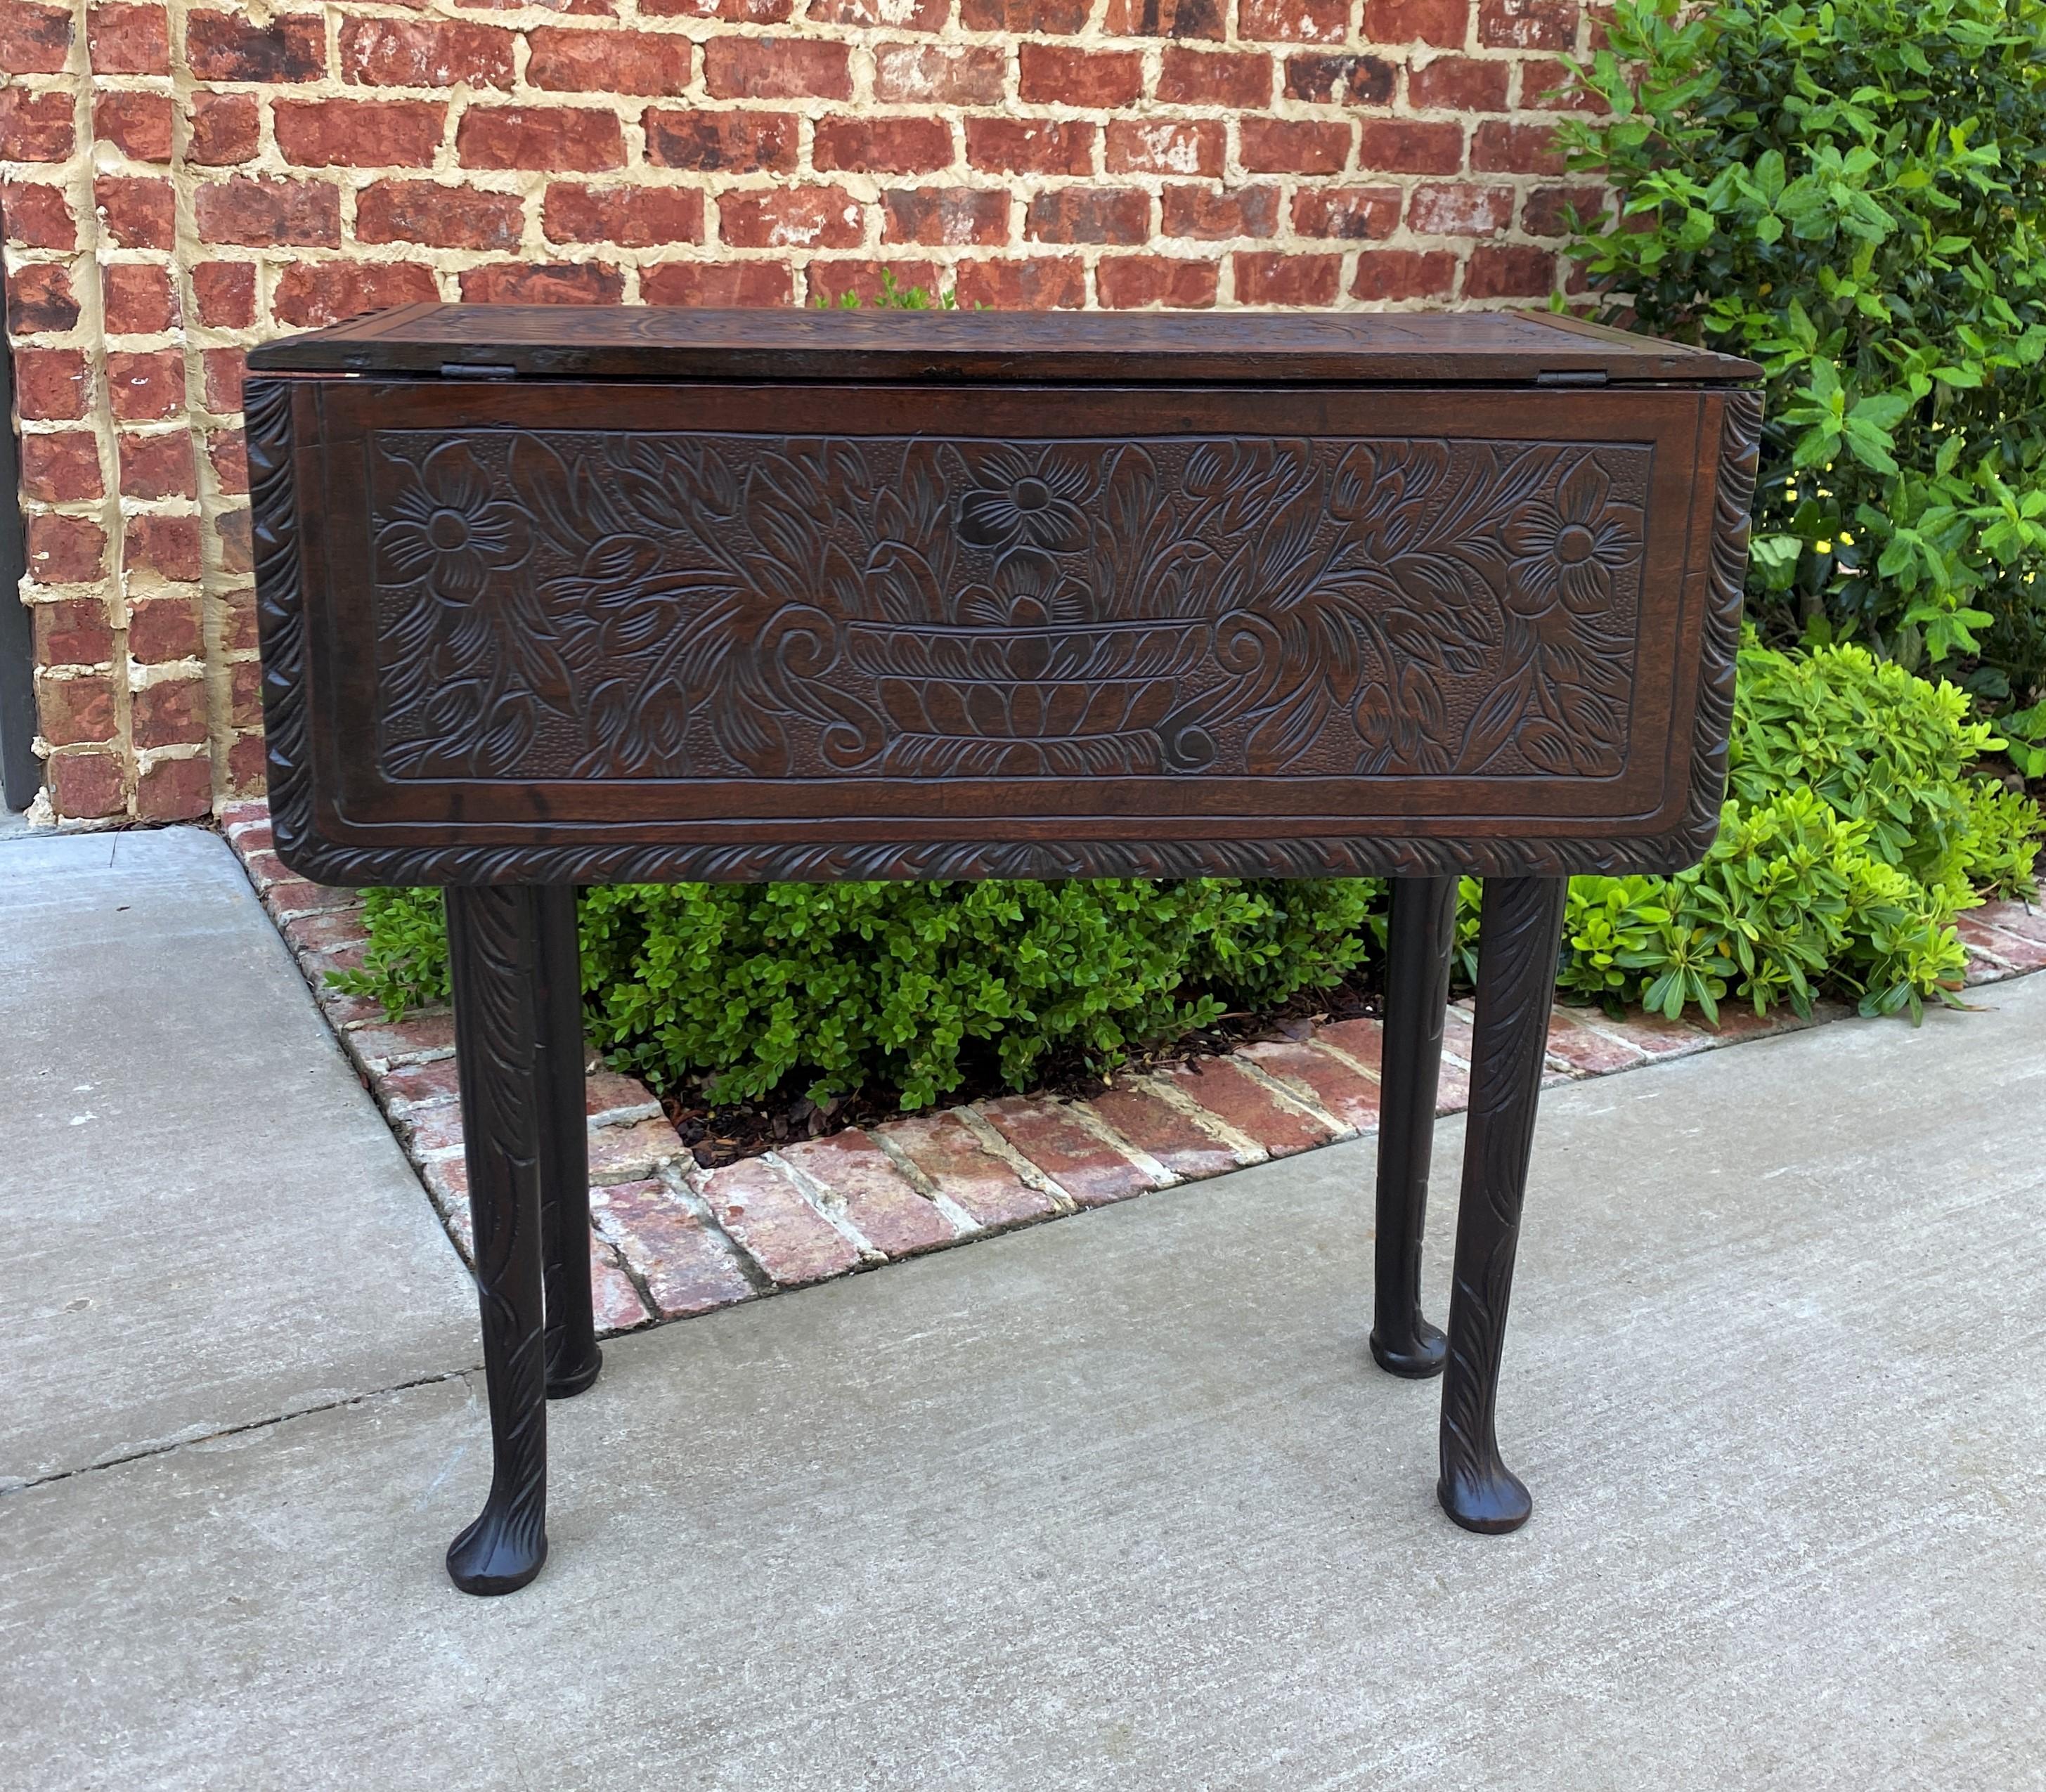 EXQUISITE Victorian Era Antique English Dark Oak Drop Leaf Gateleg Square Table~~CARVED TOP~~Carved Legs with Pad Feet~~c. 1890s

 Always in high demand~~hard-to-find drop leaf table

 Solid and sturdy~~very nice oak patina with beautiful carved